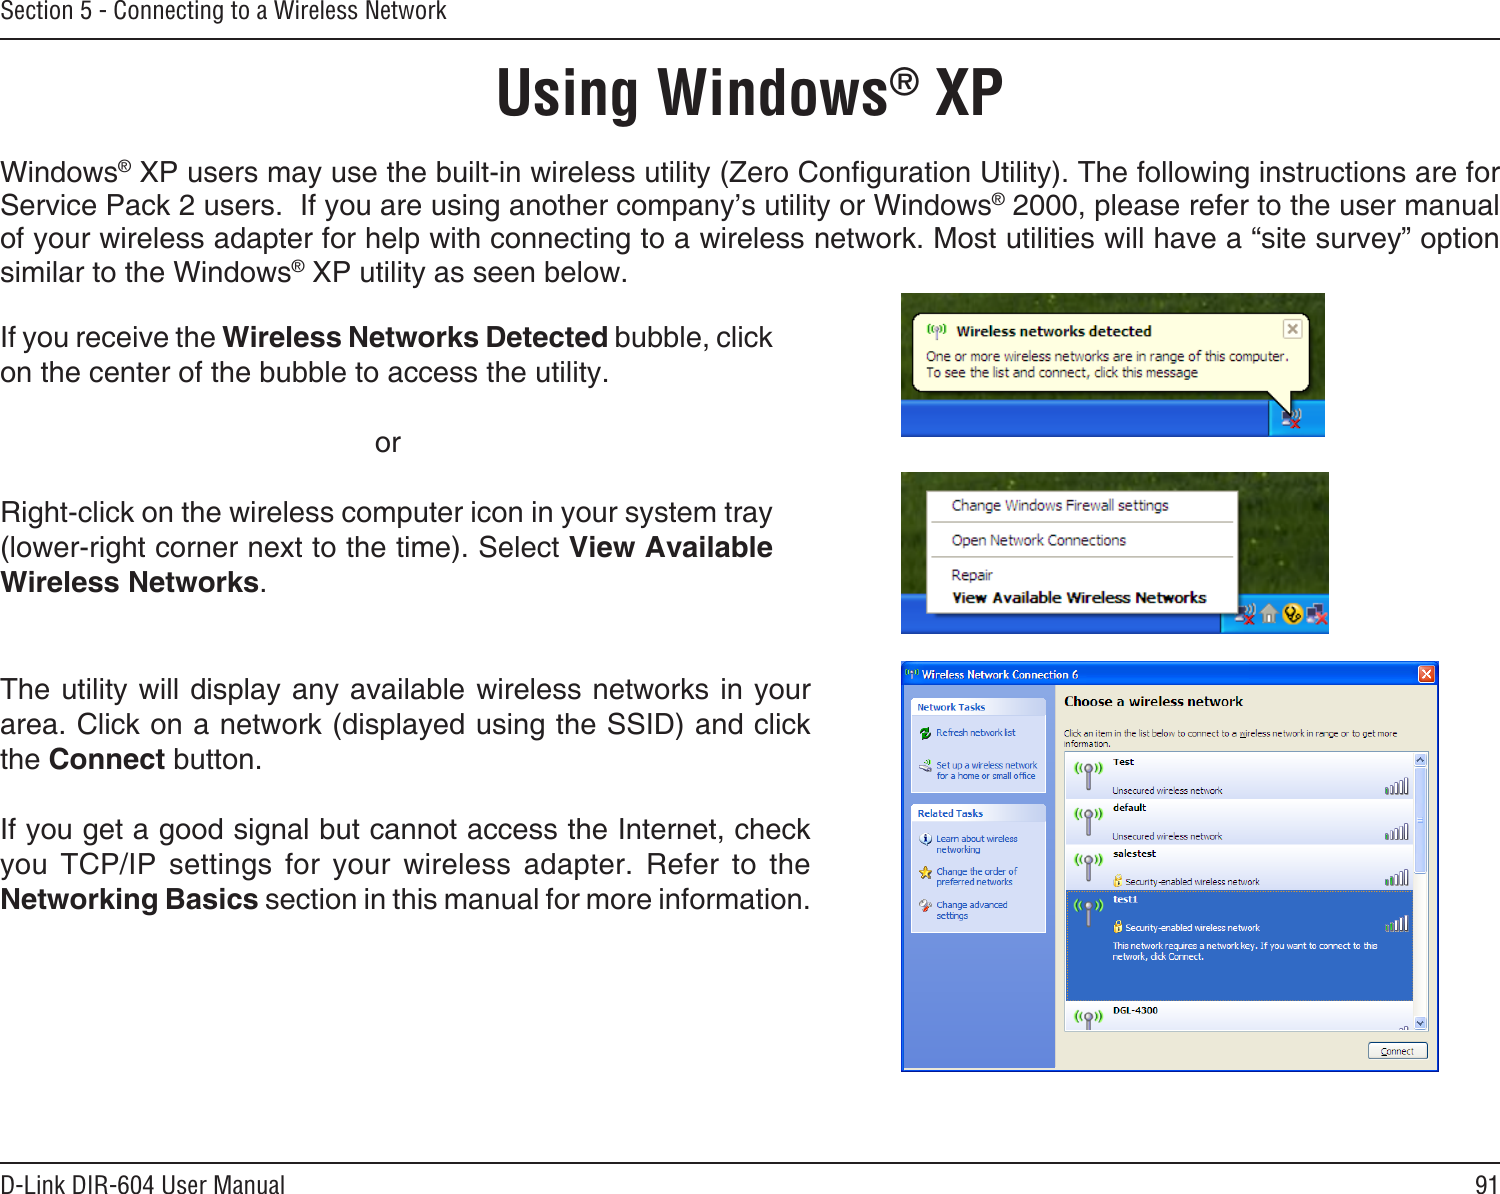 91D-Link DIR-604 User ManualSection 5 - Connecting to a Wireless NetworkUsing Windows® XPWindows® XP users may use the built-in wireless utility (Zero Conguration Utility). The following instructions are for Service Pack 2 users.  If you are using another company’s utility or Windows® 2000, please refer to the user manual of your wireless adapter for help with connecting to a wireless network. Most utilities will have a “site survey” option similar to the Windows® XP utility as seen below.If you receive the Wireless Networks Detected bubble, click on the center of the bubble to access the utility.     orRight-click on the wireless computer icon in your system tray (lower-right corner next to the time). Select View Available Wireless Networks.The utility will display any available wireless networks in your area. Click on a network (displayed using the SSID) and click the Connect button.If you get a good signal but cannot access the Internet, check you  TCP/IP  settings  for  your  wireless  adapter.  Refer  to  the Networking Basics section in this manual for more information.